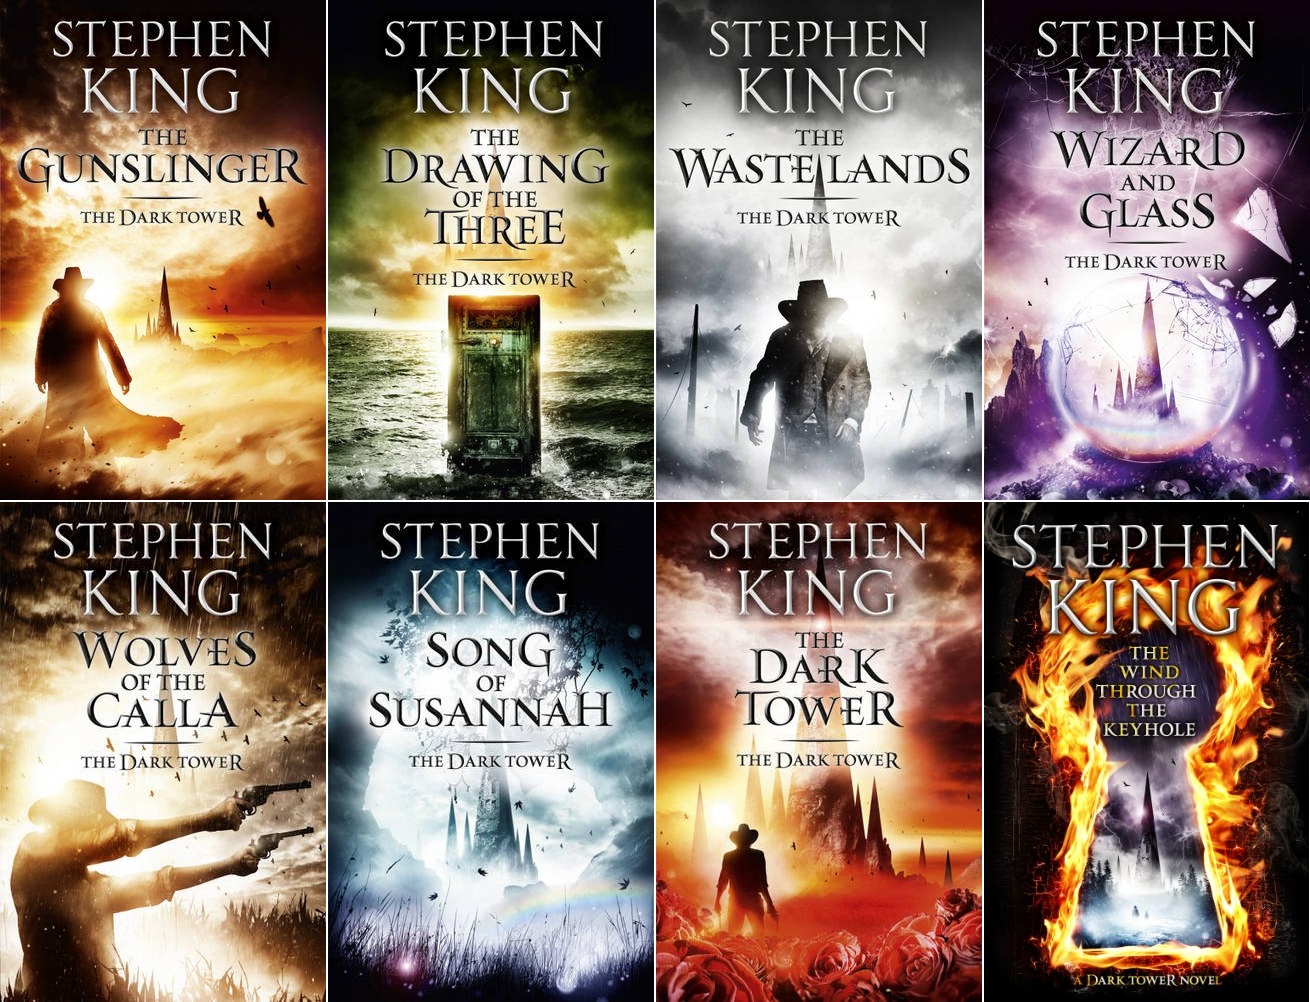 Sony Moving Forward With The Dark Tower Film Series